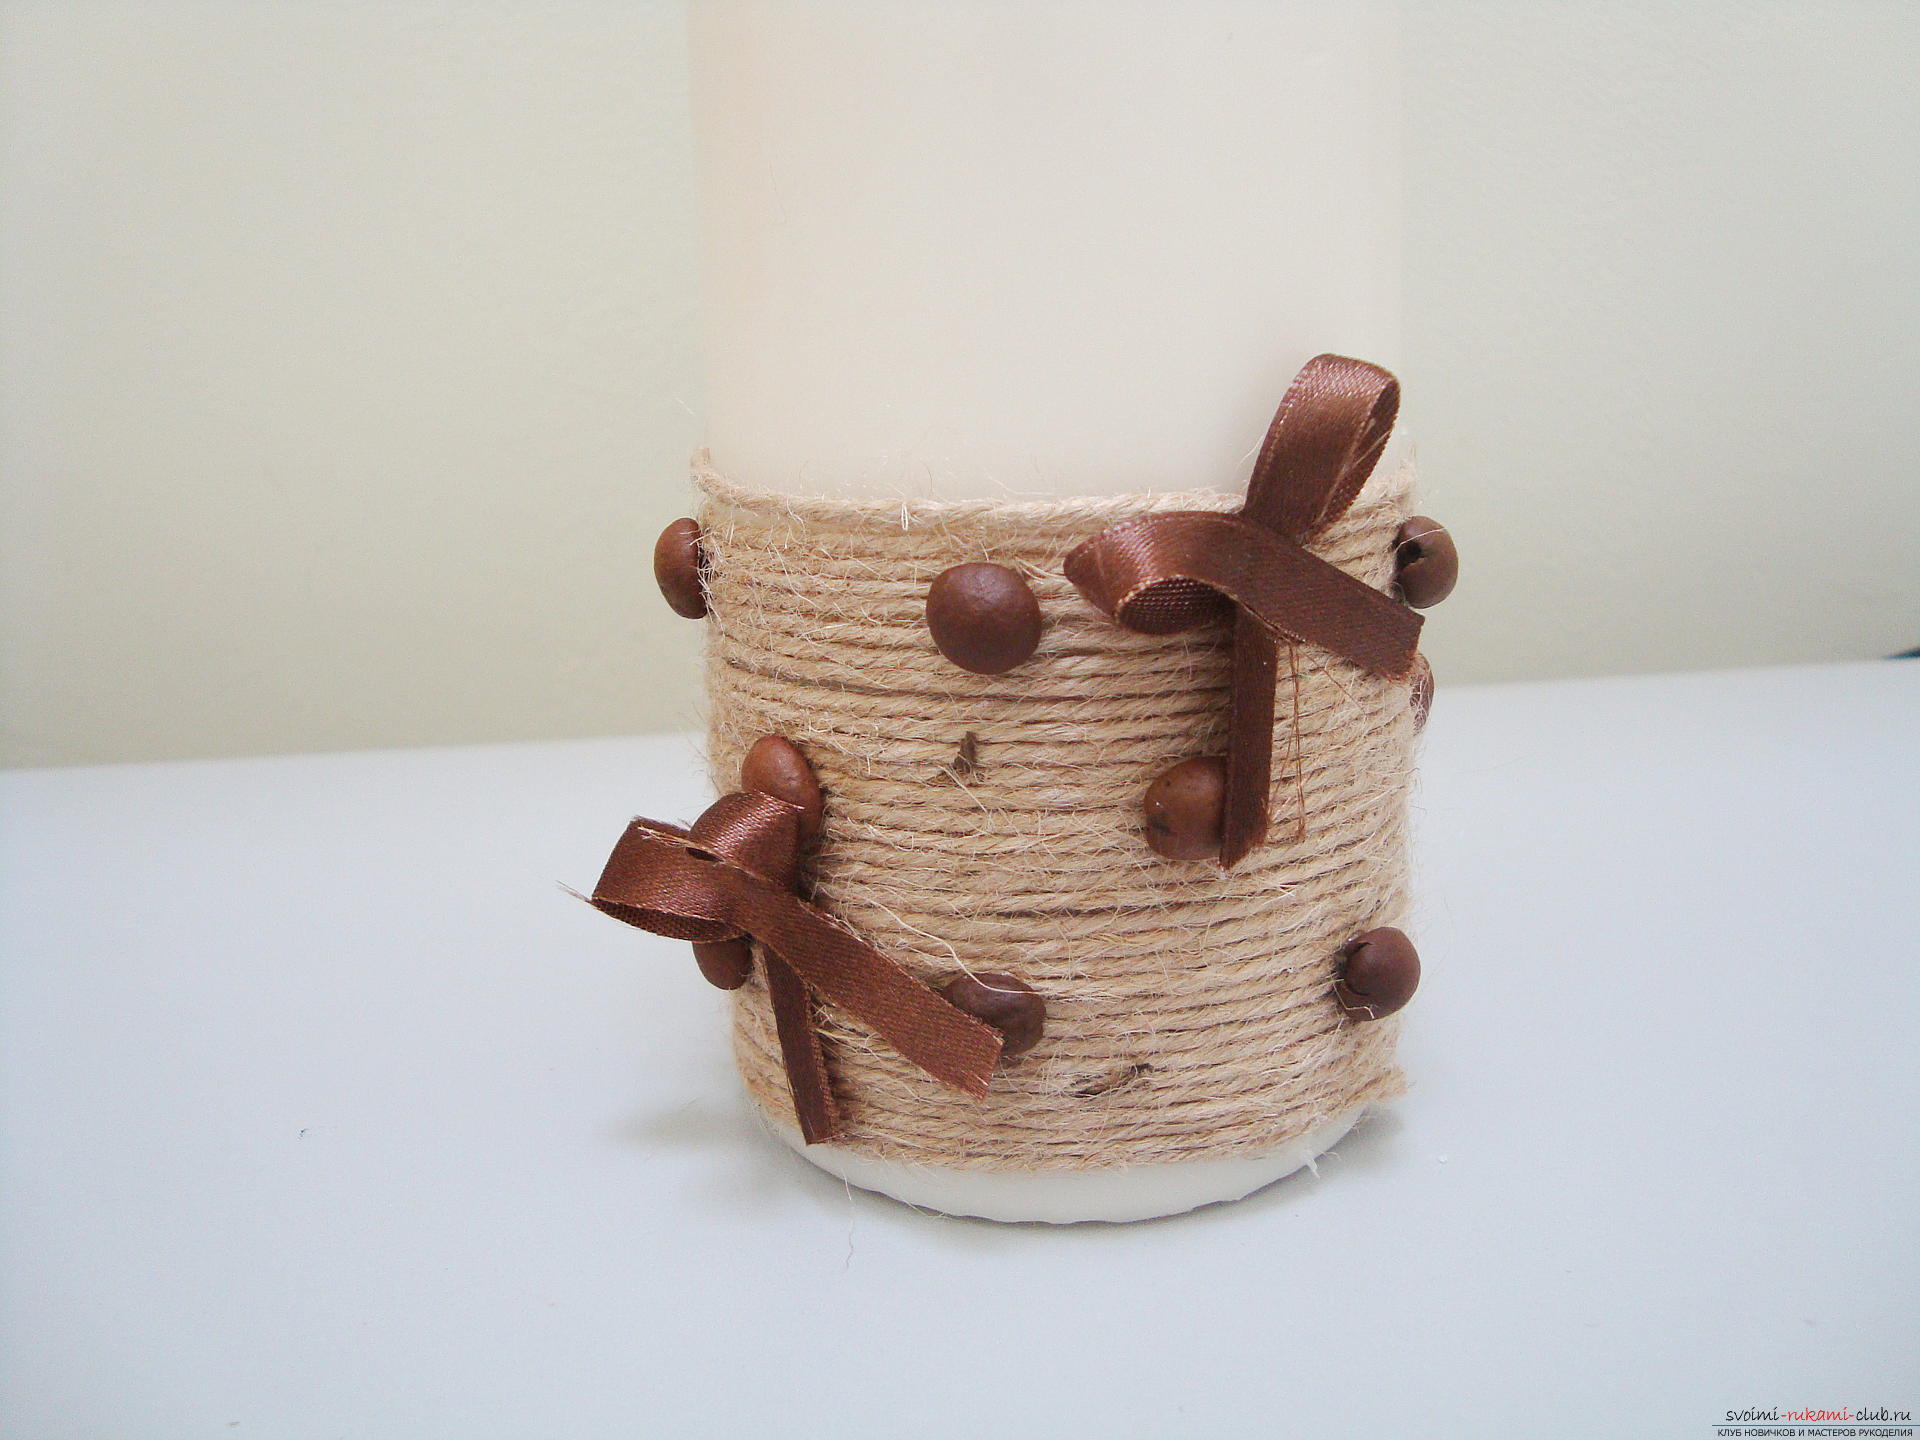 Photos to the step-by-step guide on making a decorative candle made from coffee beans. Photo Number 11